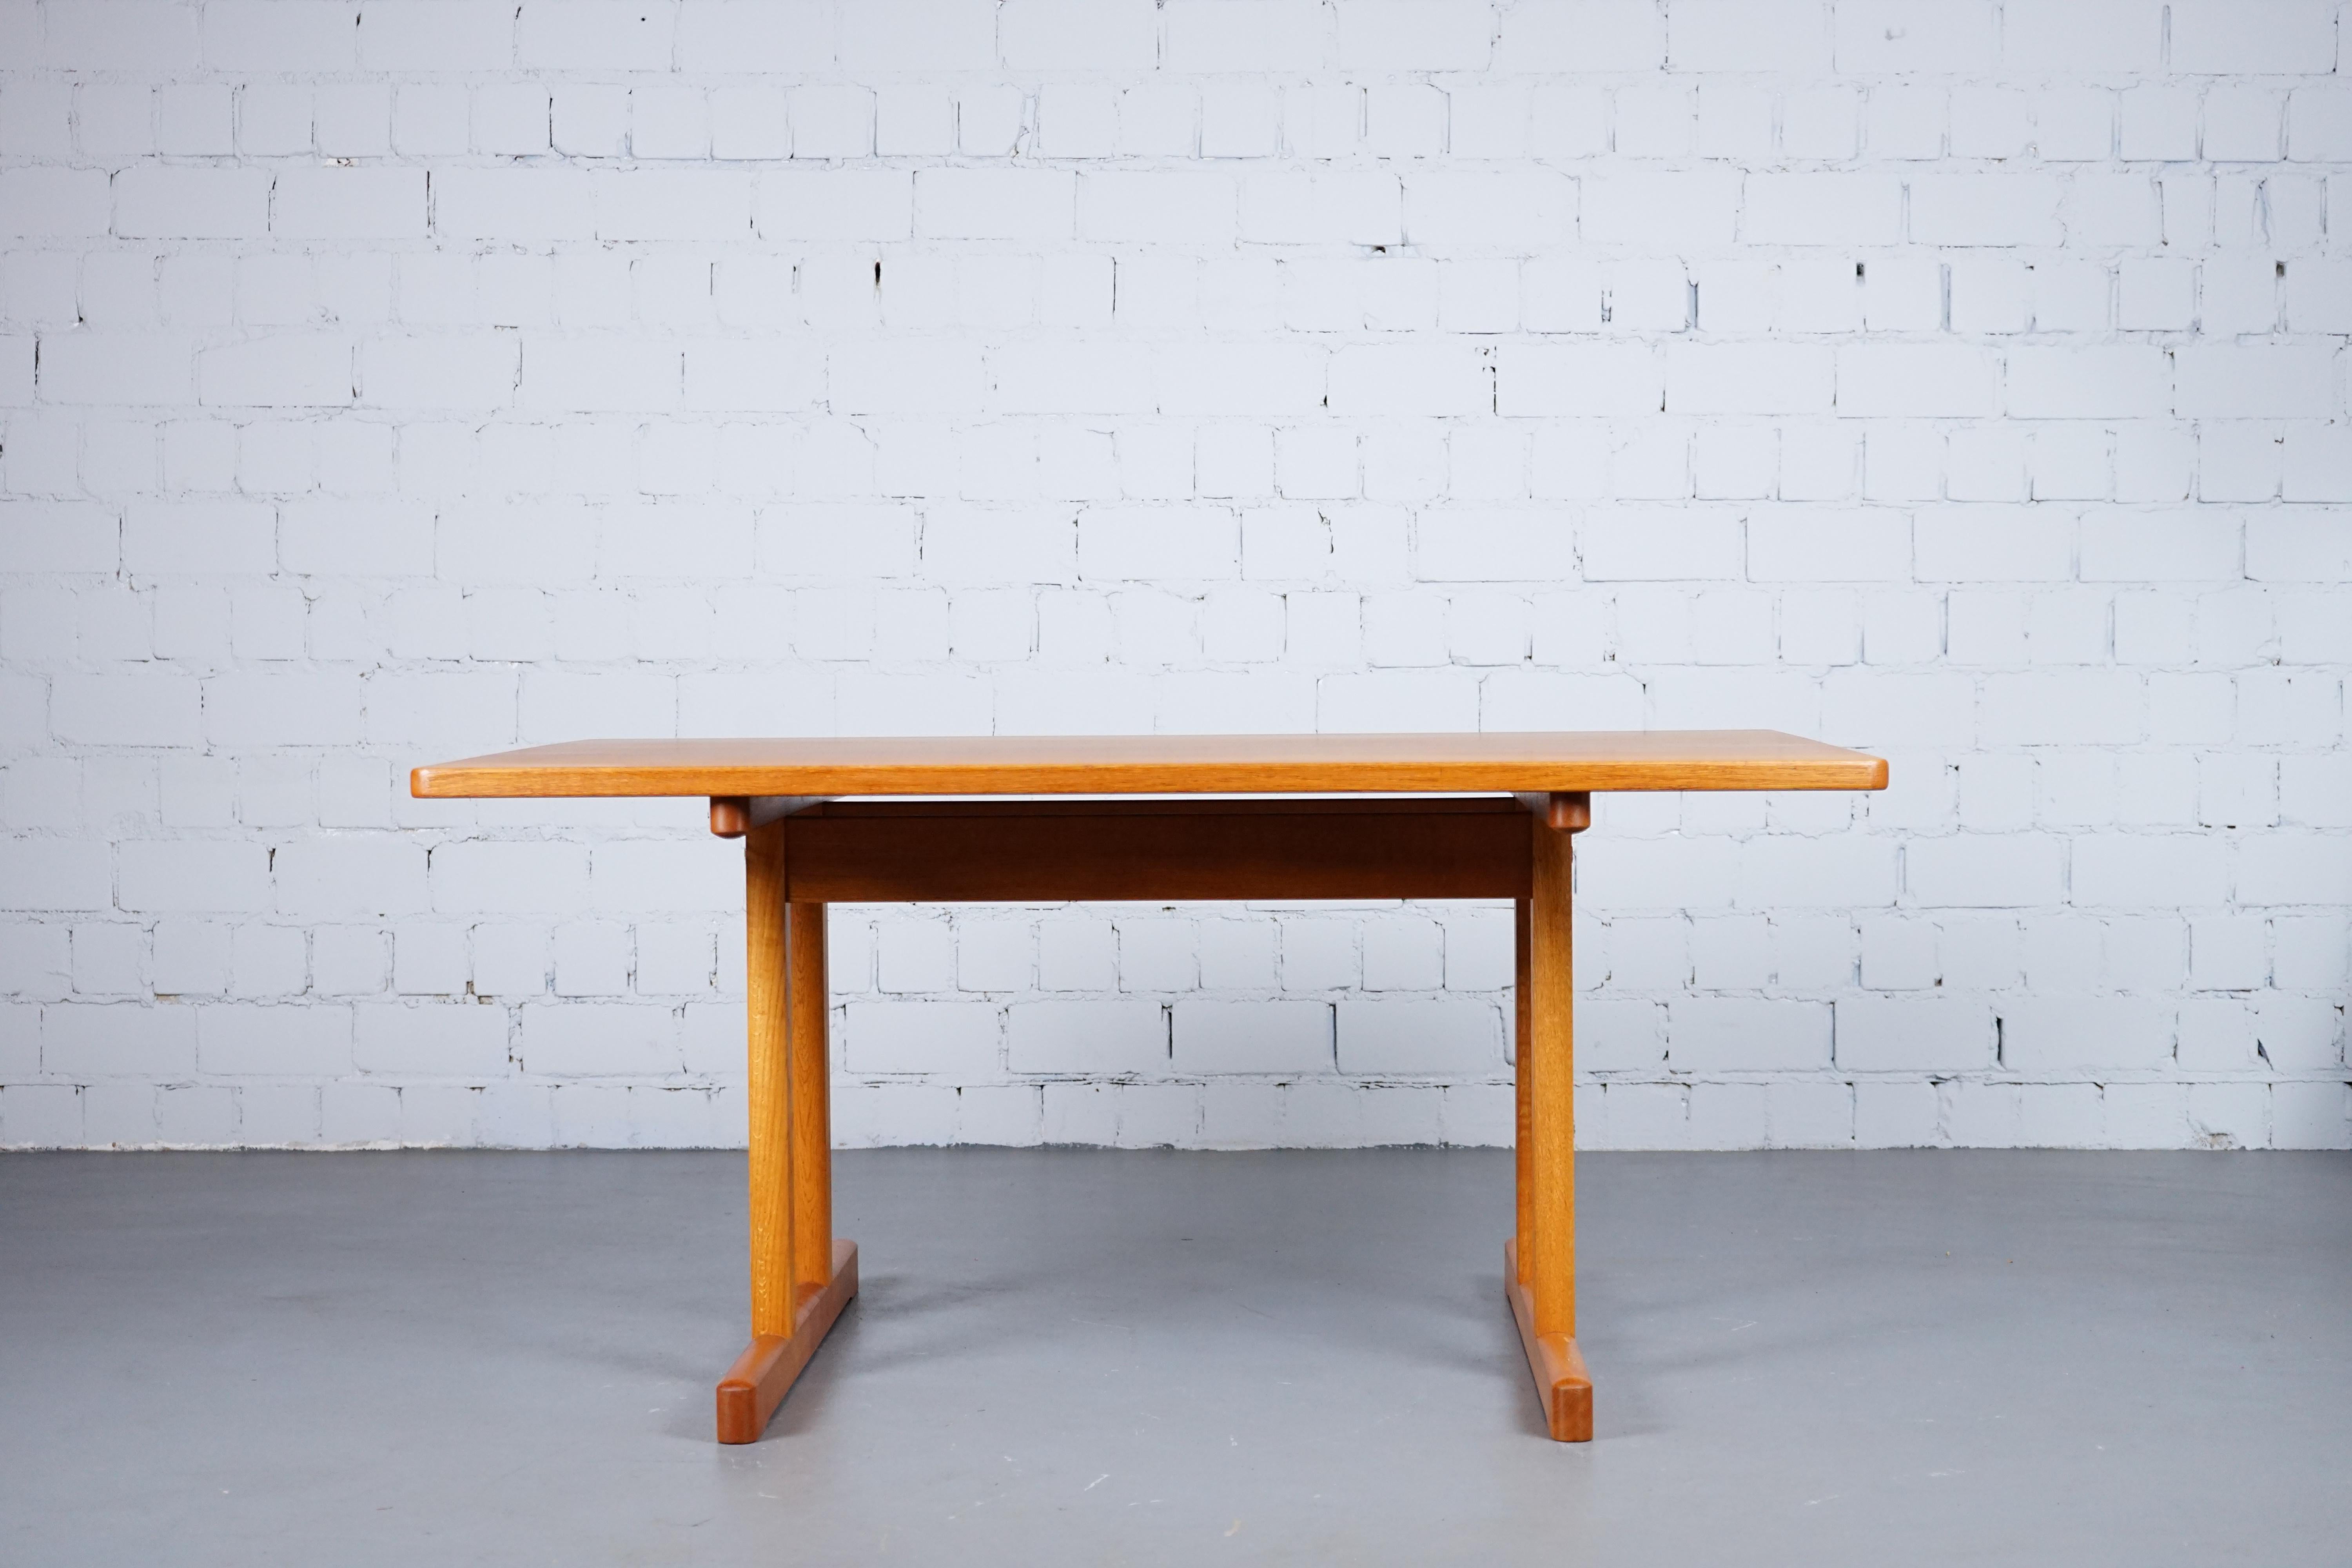 Beautiful Mid Century Modern solid oak dining table model 6289 designed by Børge Mogensen for Fredericia (Denmark). The table was completely restored by our professional carpenter and treated with natural hard wax oil.